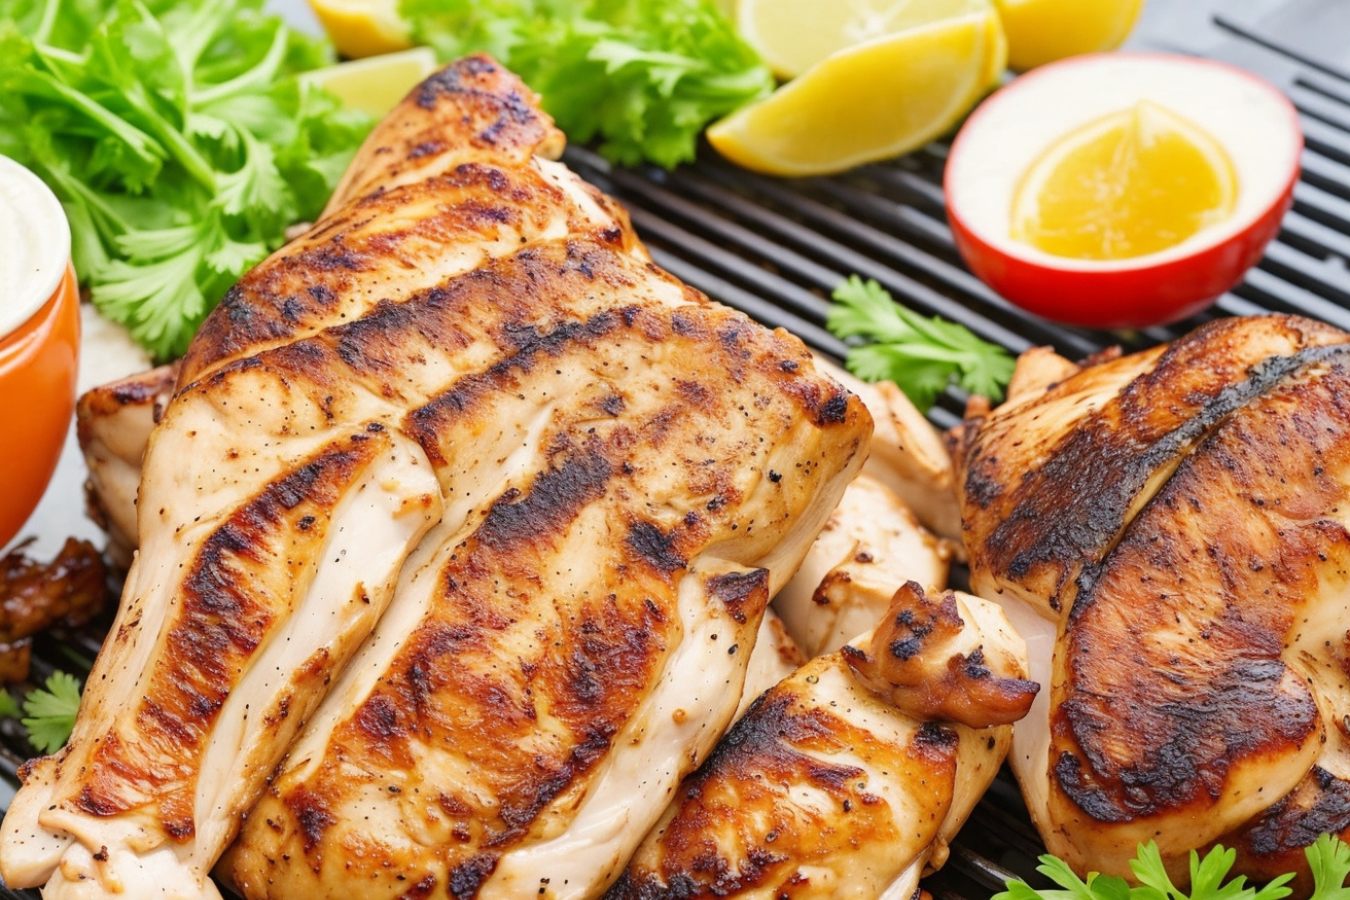 Direct Vs Indirect Grilling Chicken